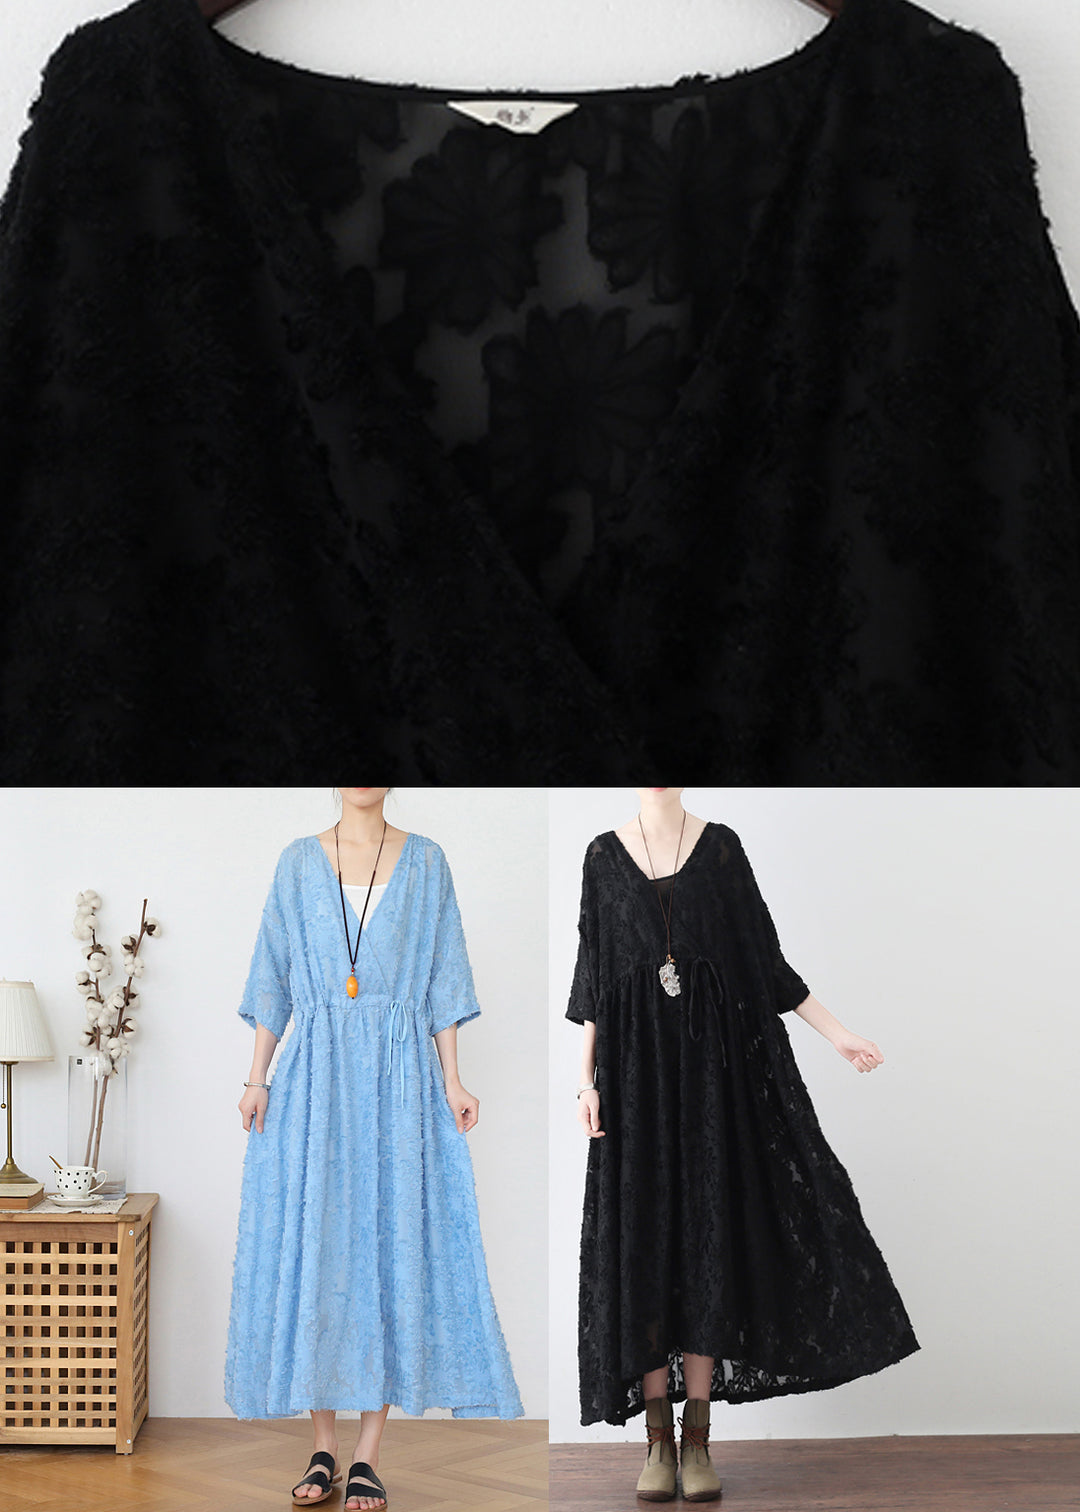 Classy Blue V Neck Cinched Hollow Out Chiffon Maxi Dress Long Sleeve